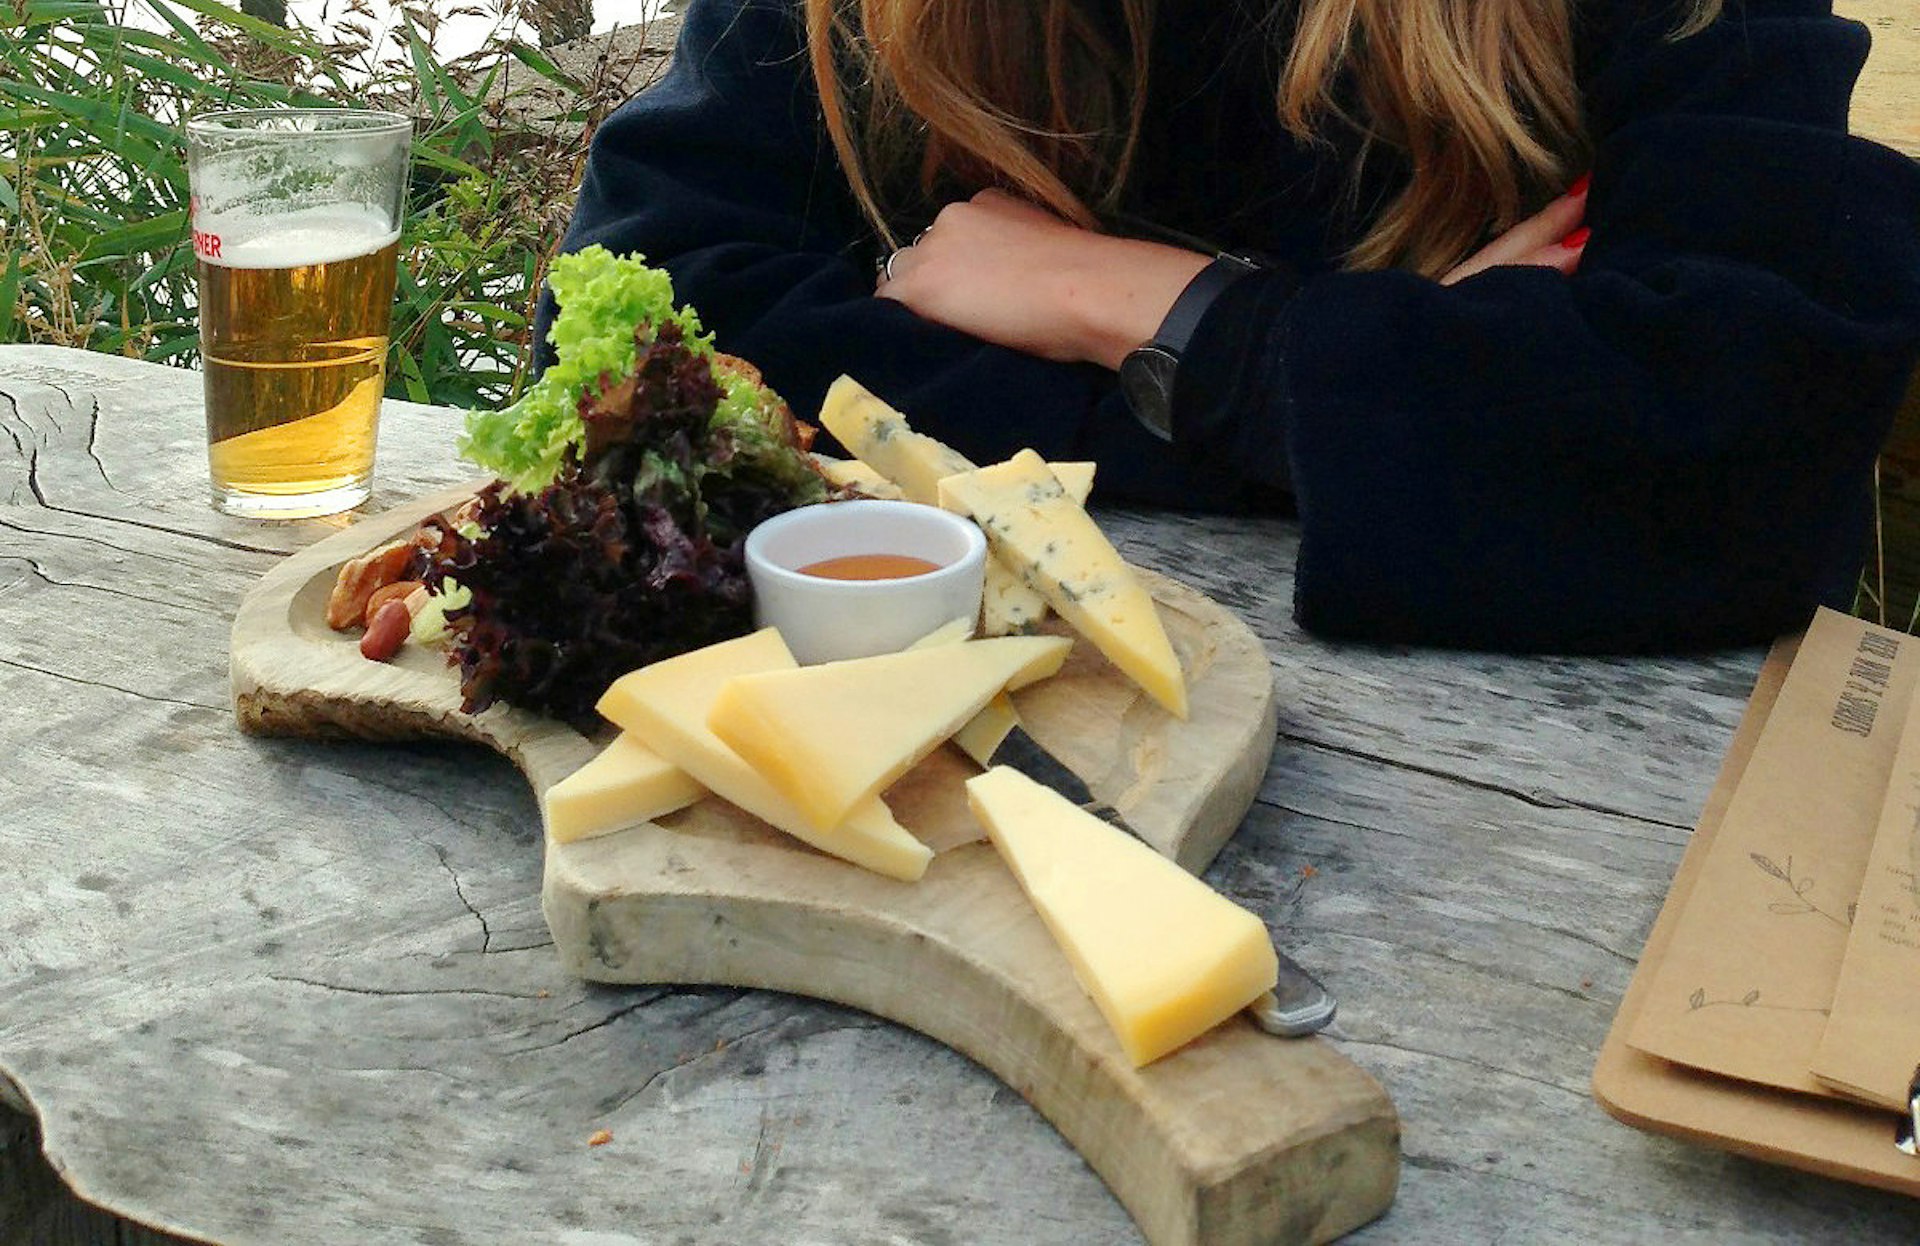 A woman with crossed arms sat over a Café de Ceuvel cheese board with a pint of partially-drunk lager on the wooden table